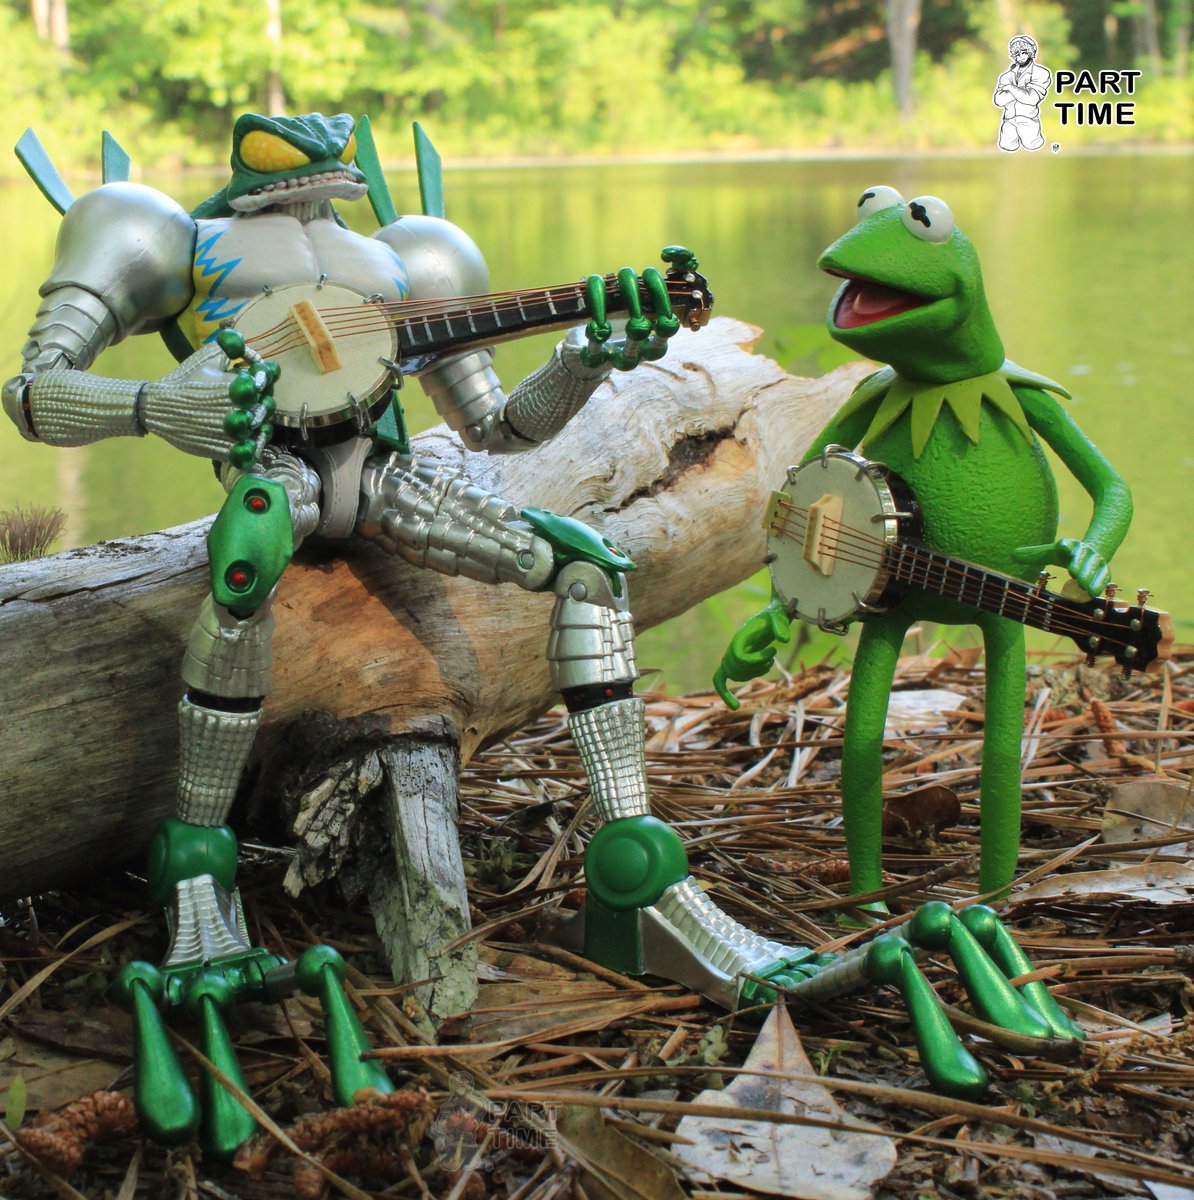 On the bright side, you do sing better than Fozzie.
@EthanVanSciver
#cyberfrog #kermit #rektplanet #comicsgate #themuppets #thejimhensoncompany #rainbowconnection #actionfigures #actionfigurephotography #toyphotography #toyphoto #toypic